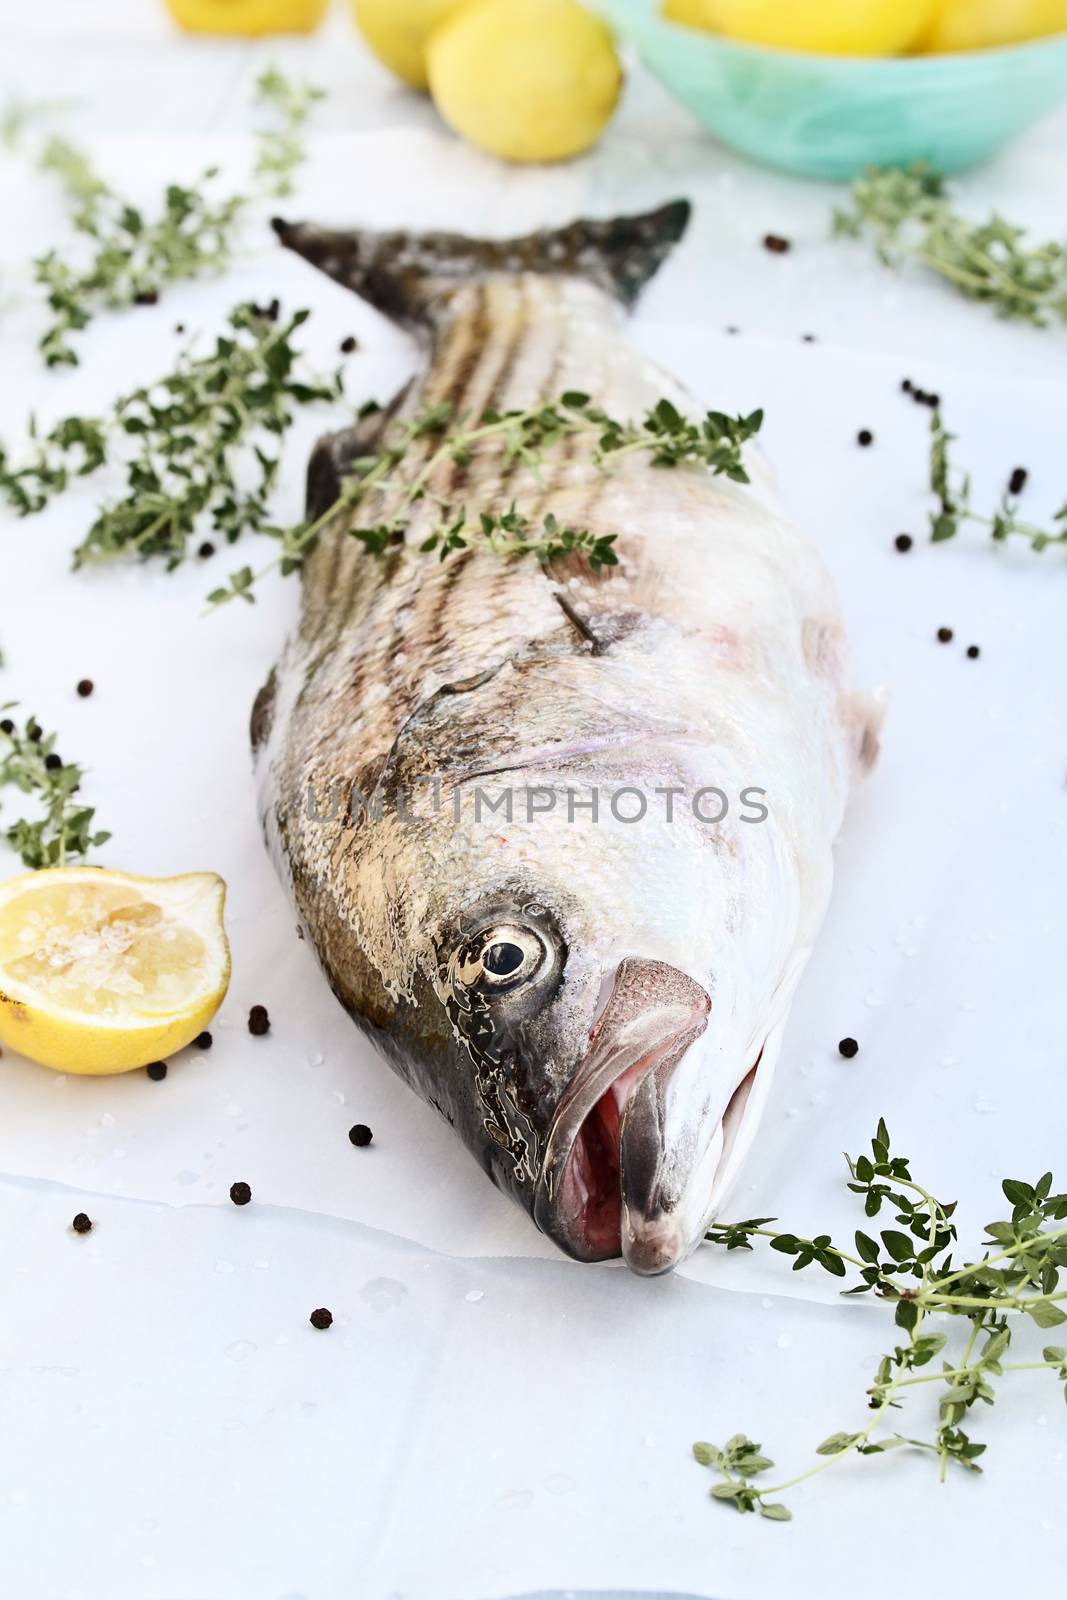  Striped Bass With Fresh Herbs and Lemons by StephanieFrey